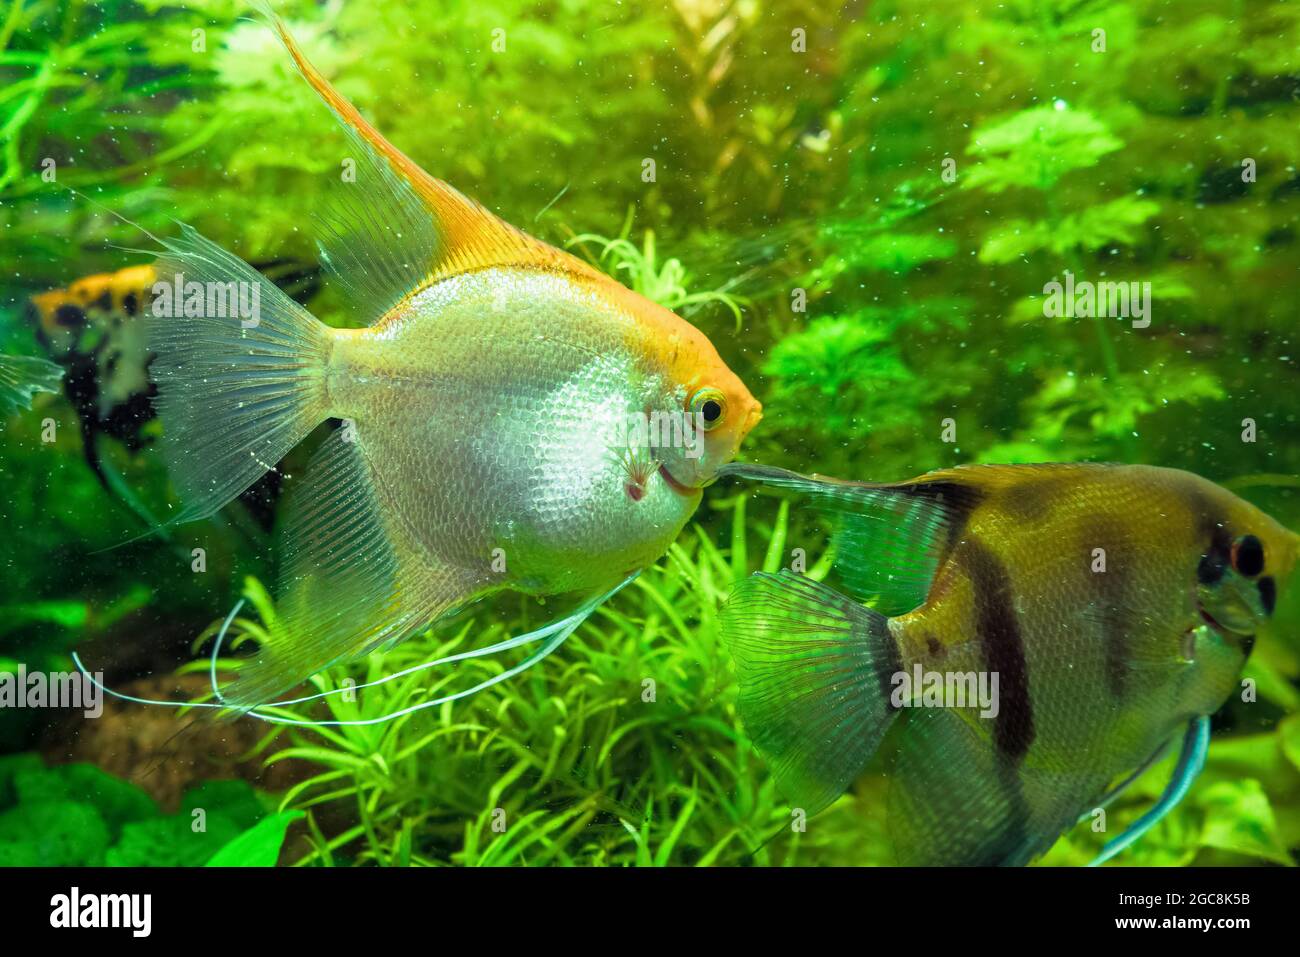 close up view of silver and orange freshwater angelfish swimming Stock Photo